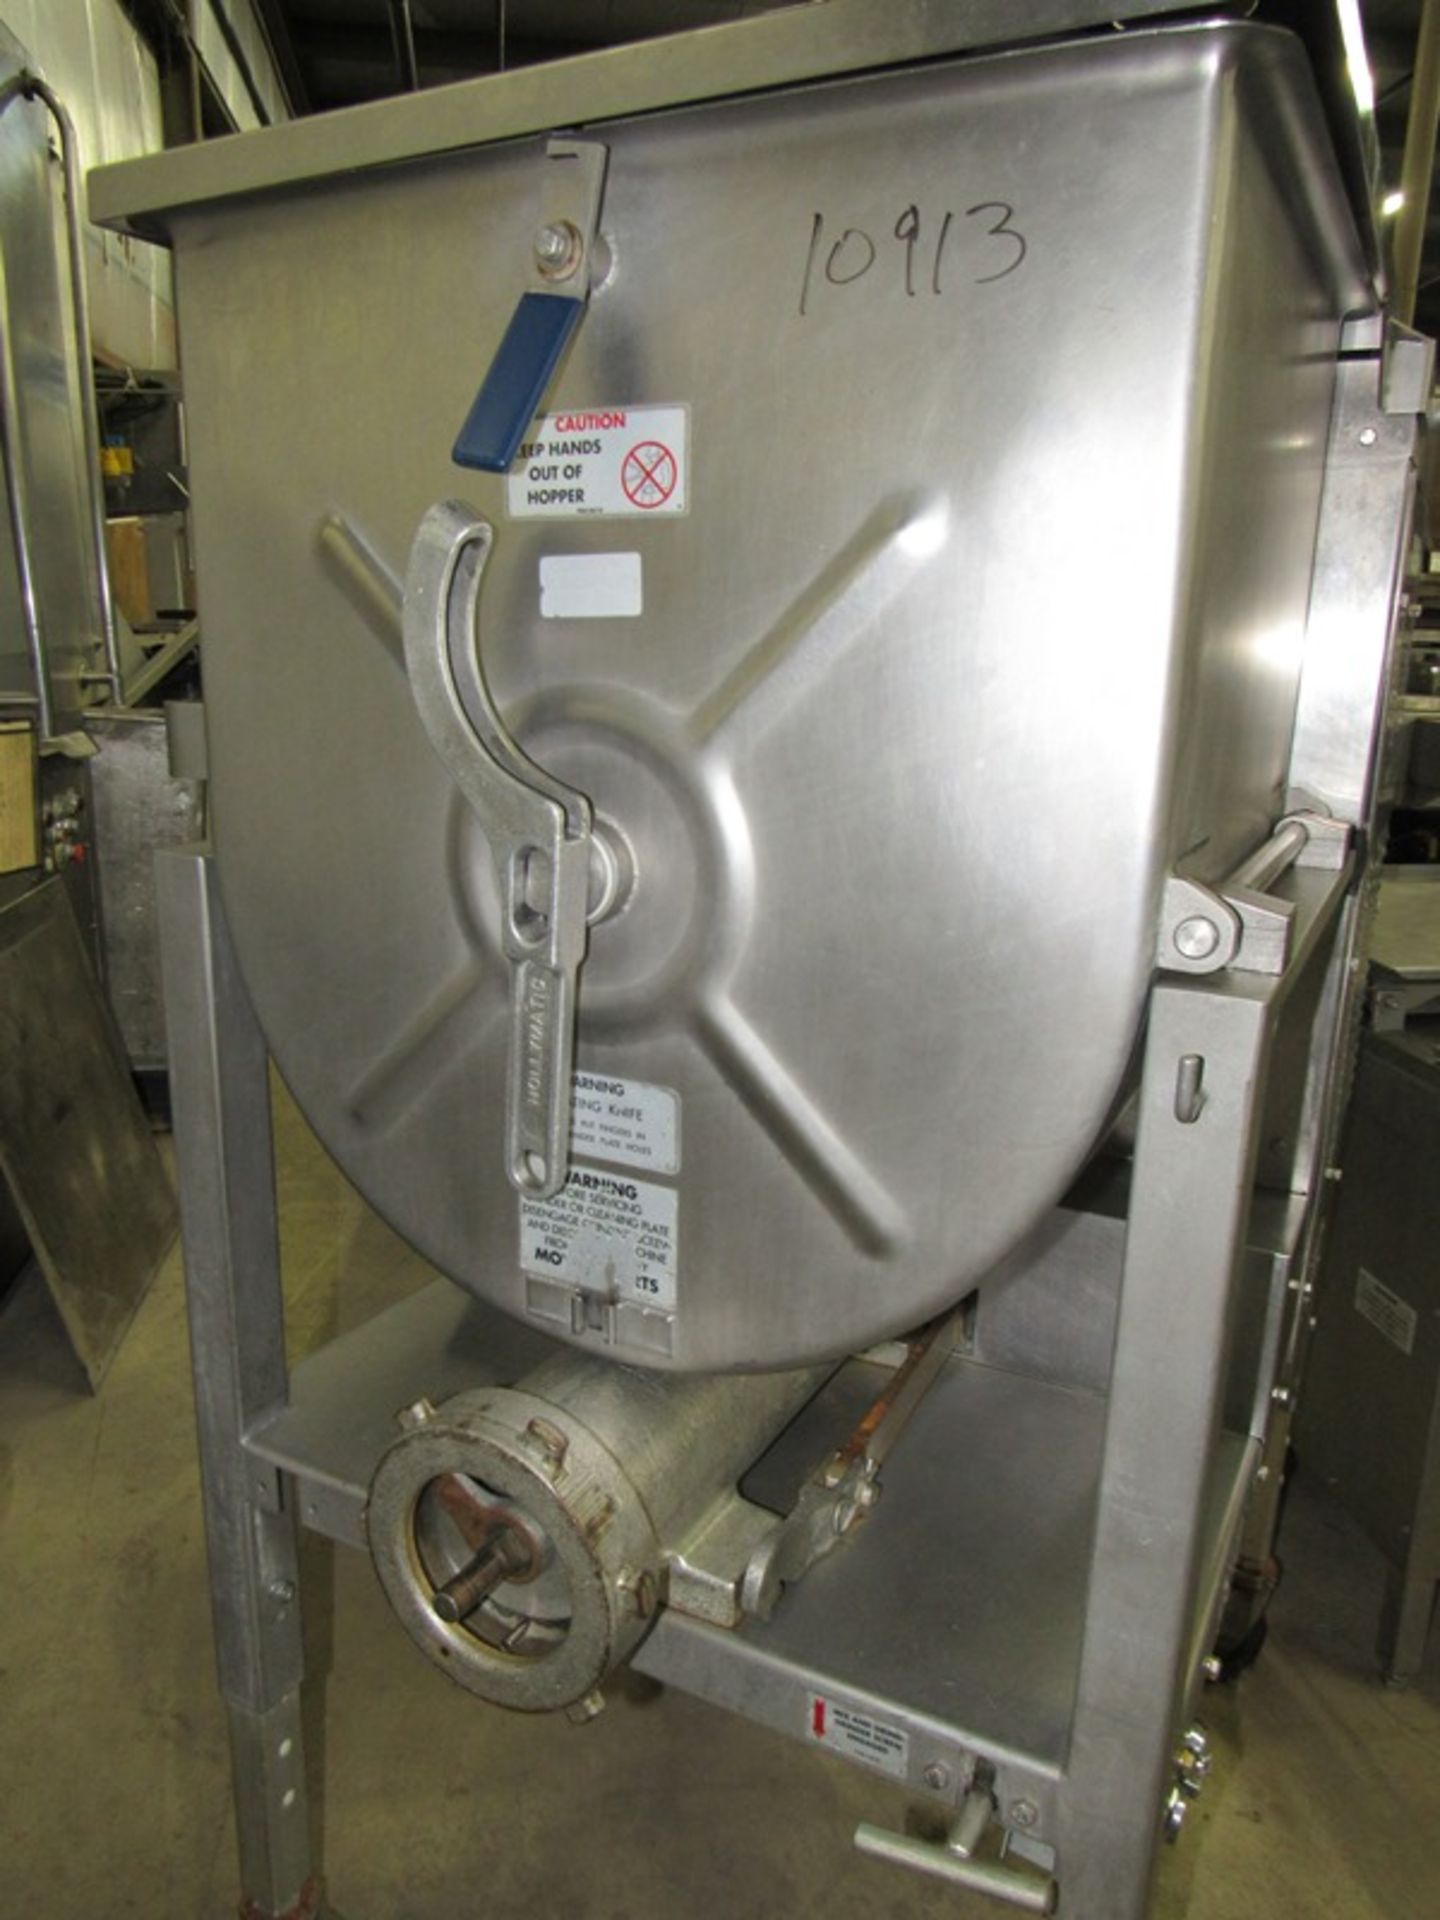 Hollymatic Mdl GMG180A Mixer/Grinder, 230 volts, 3 phase - ***All Monies must be received by Friday - Image 4 of 5